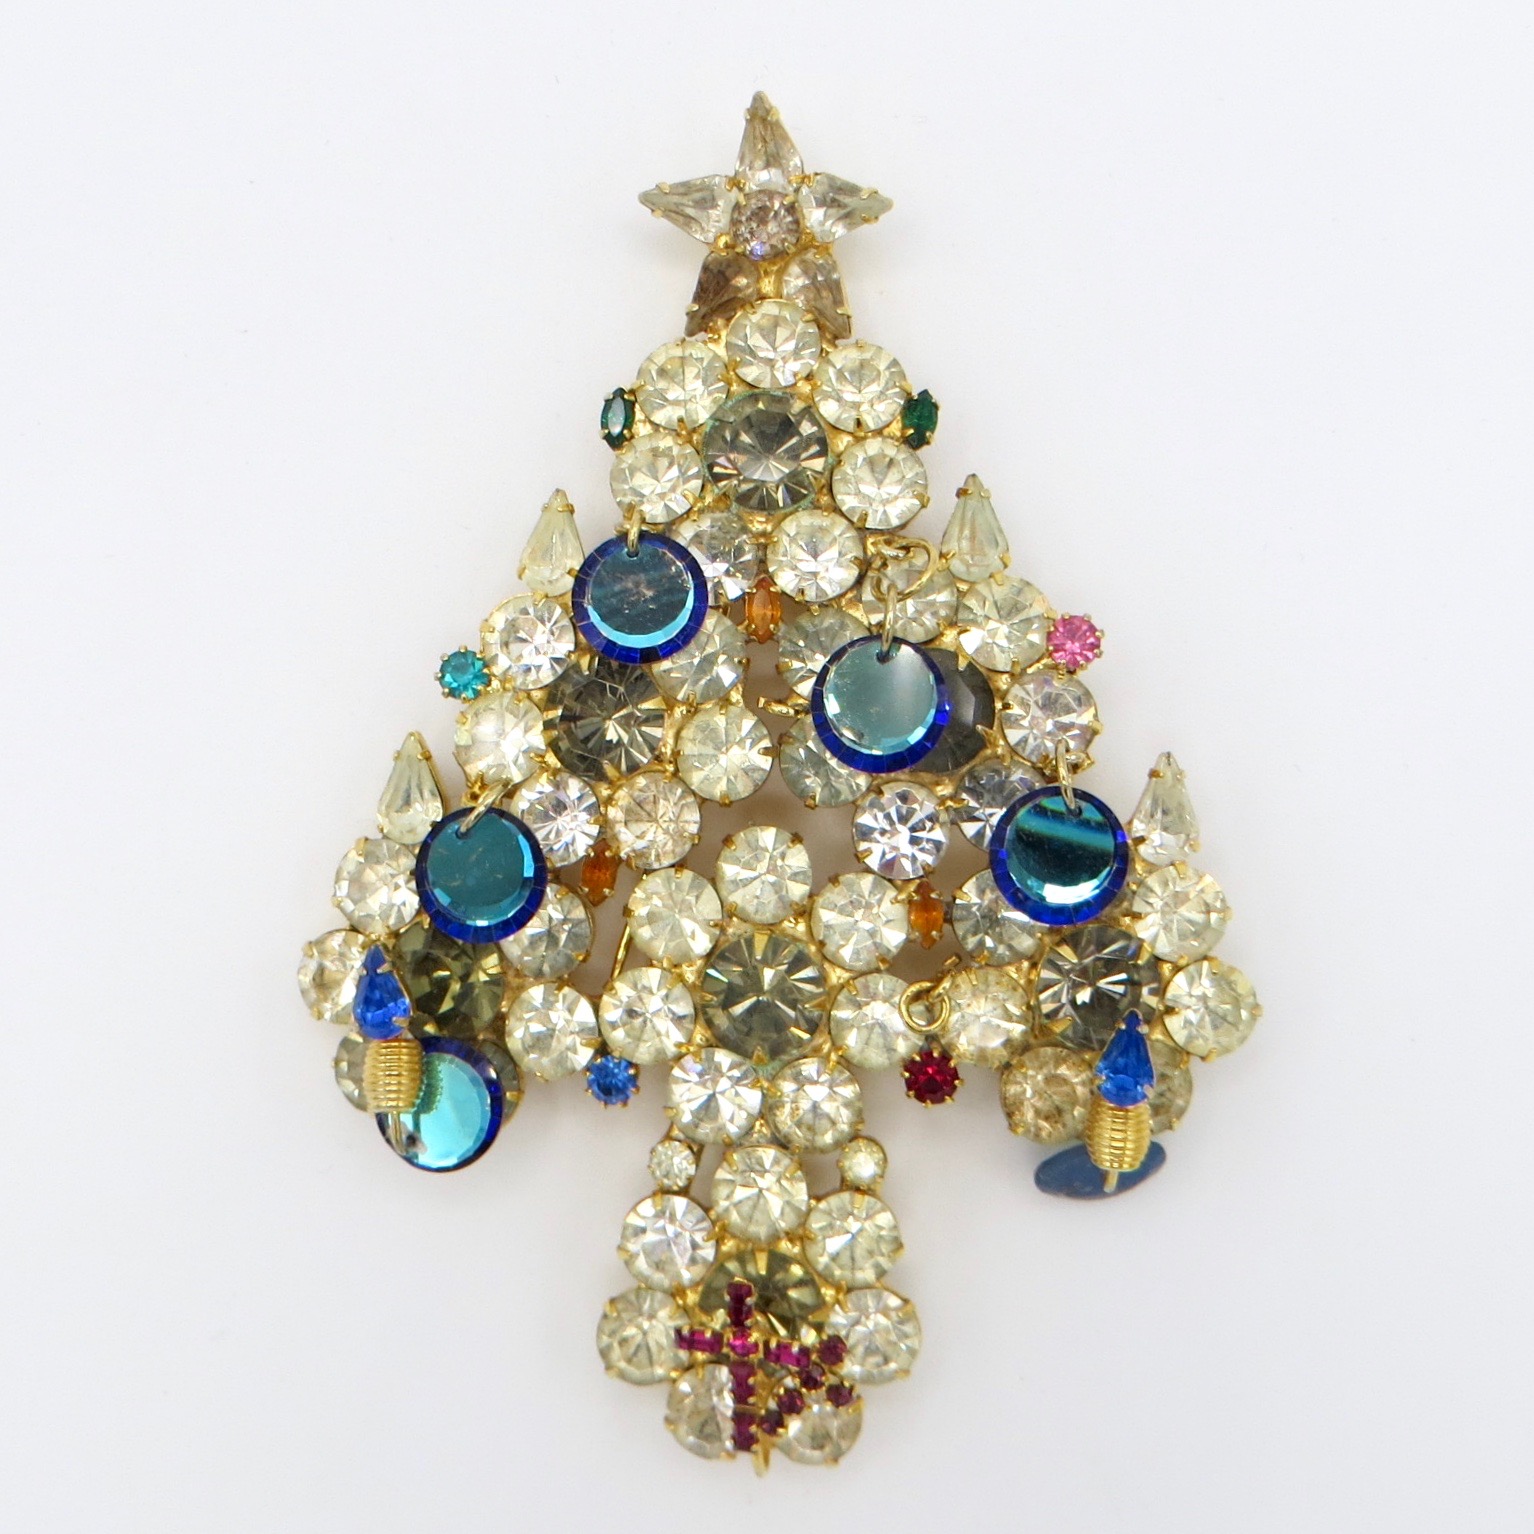 Large Anthony Attruia Christmas Tree Brooch